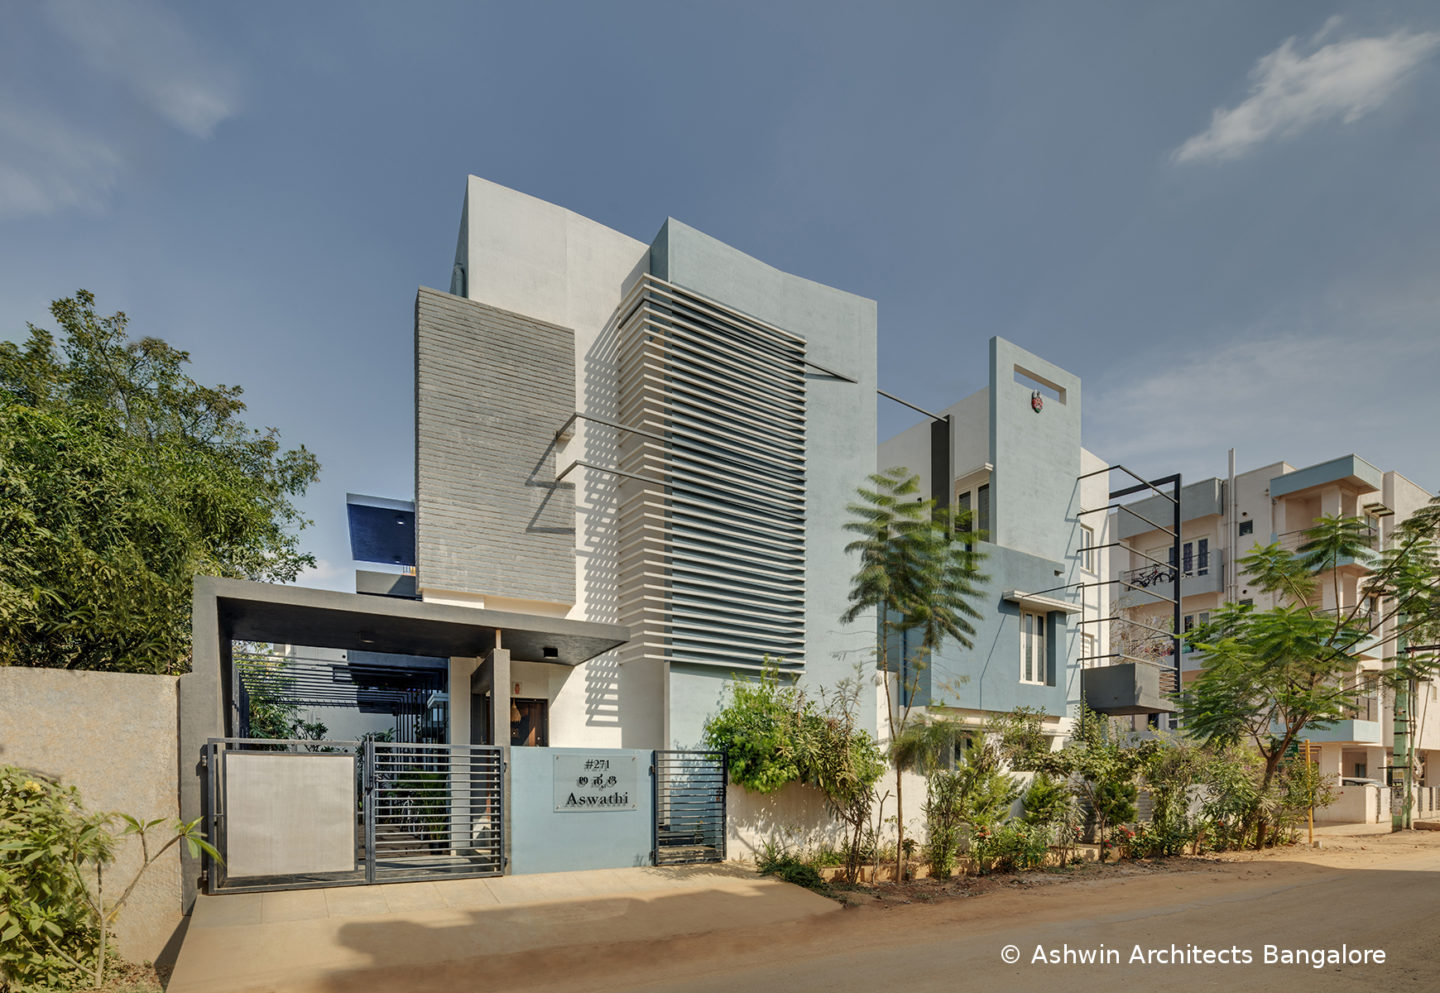 indian bungalow designs 1500 sq ft Archives » ASHWIN ARCHITECTS ®